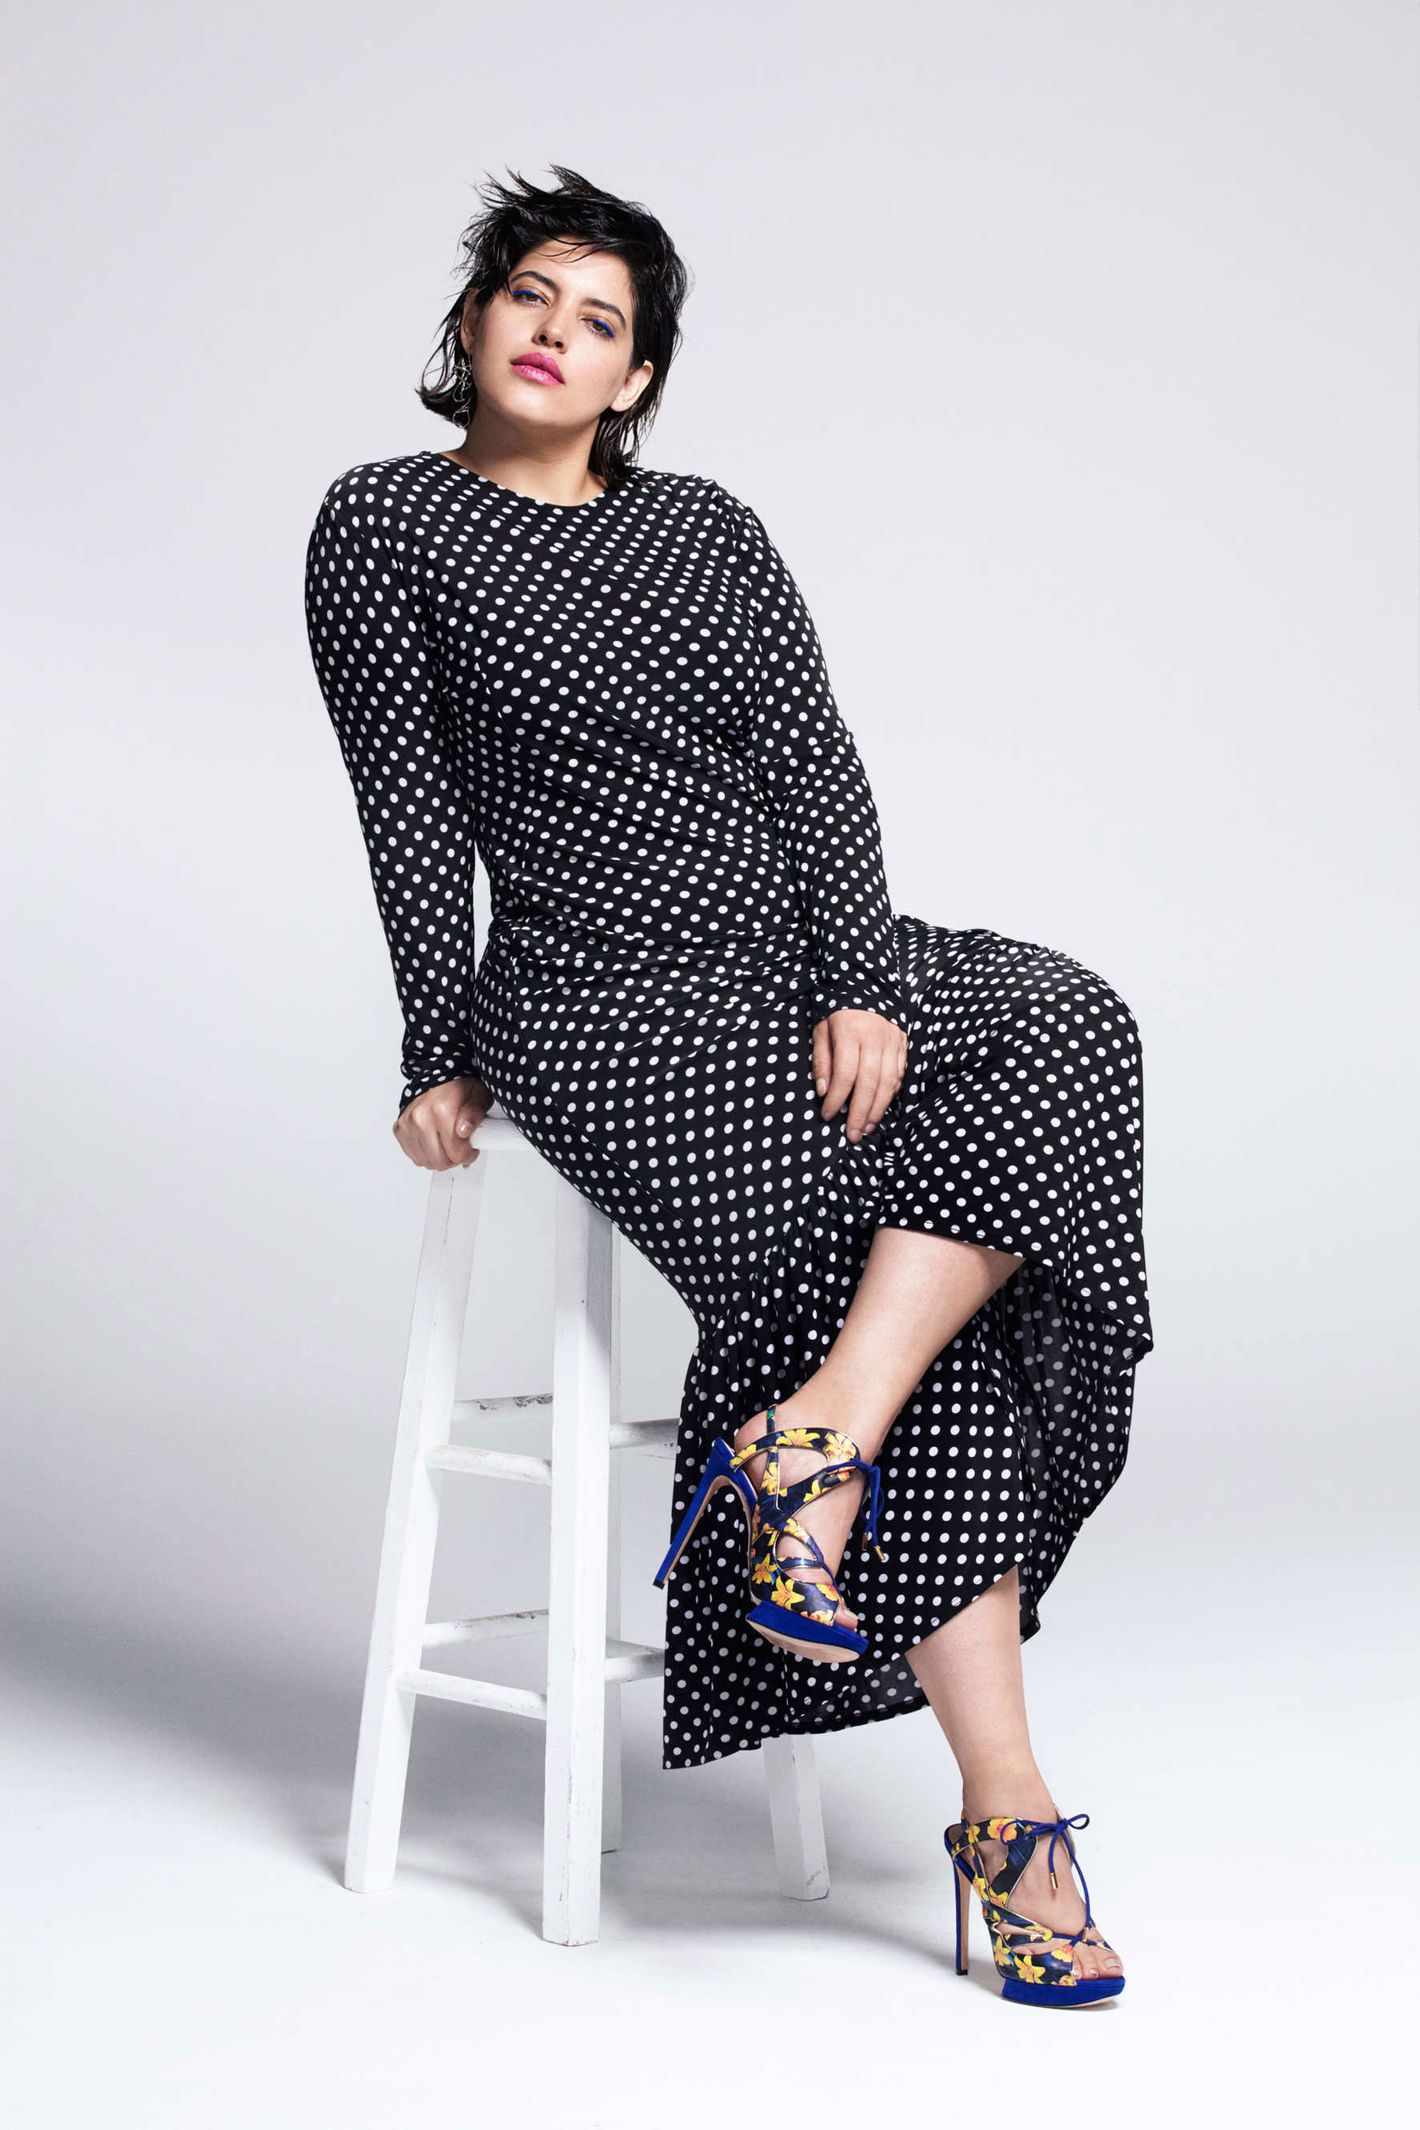 1420px x 2130px - Denise Bidot on Body Confidence at Any Size